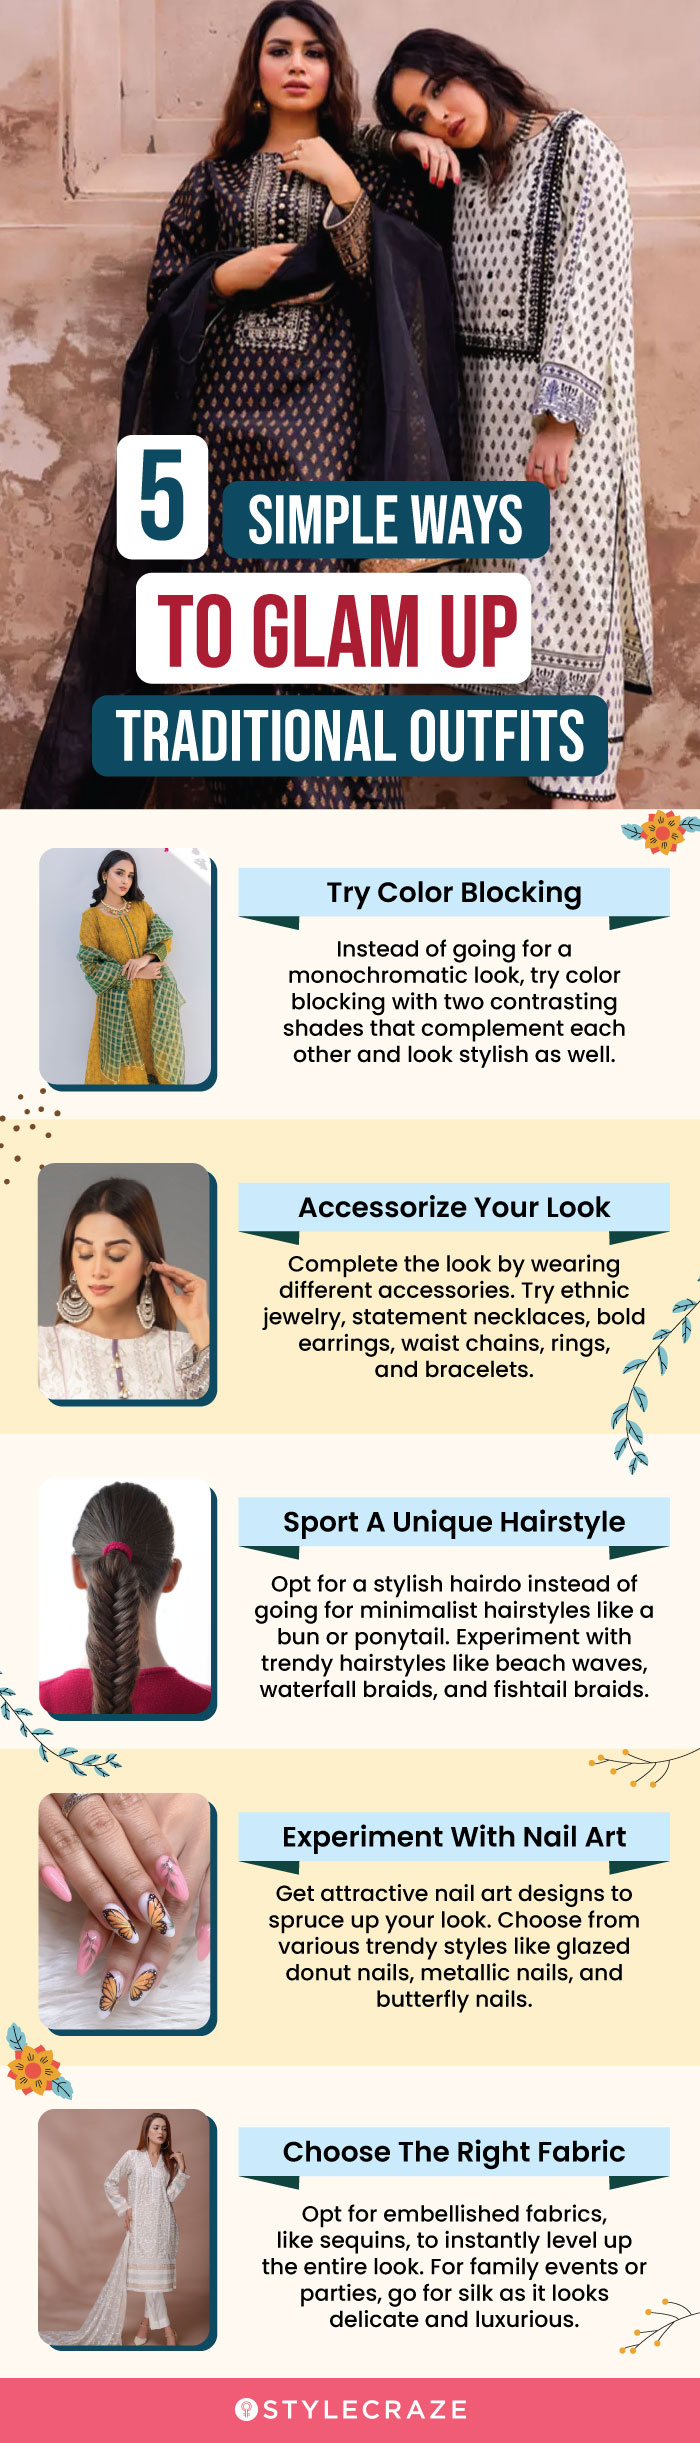 5 simple ways to glam up traditional attires (infographic)